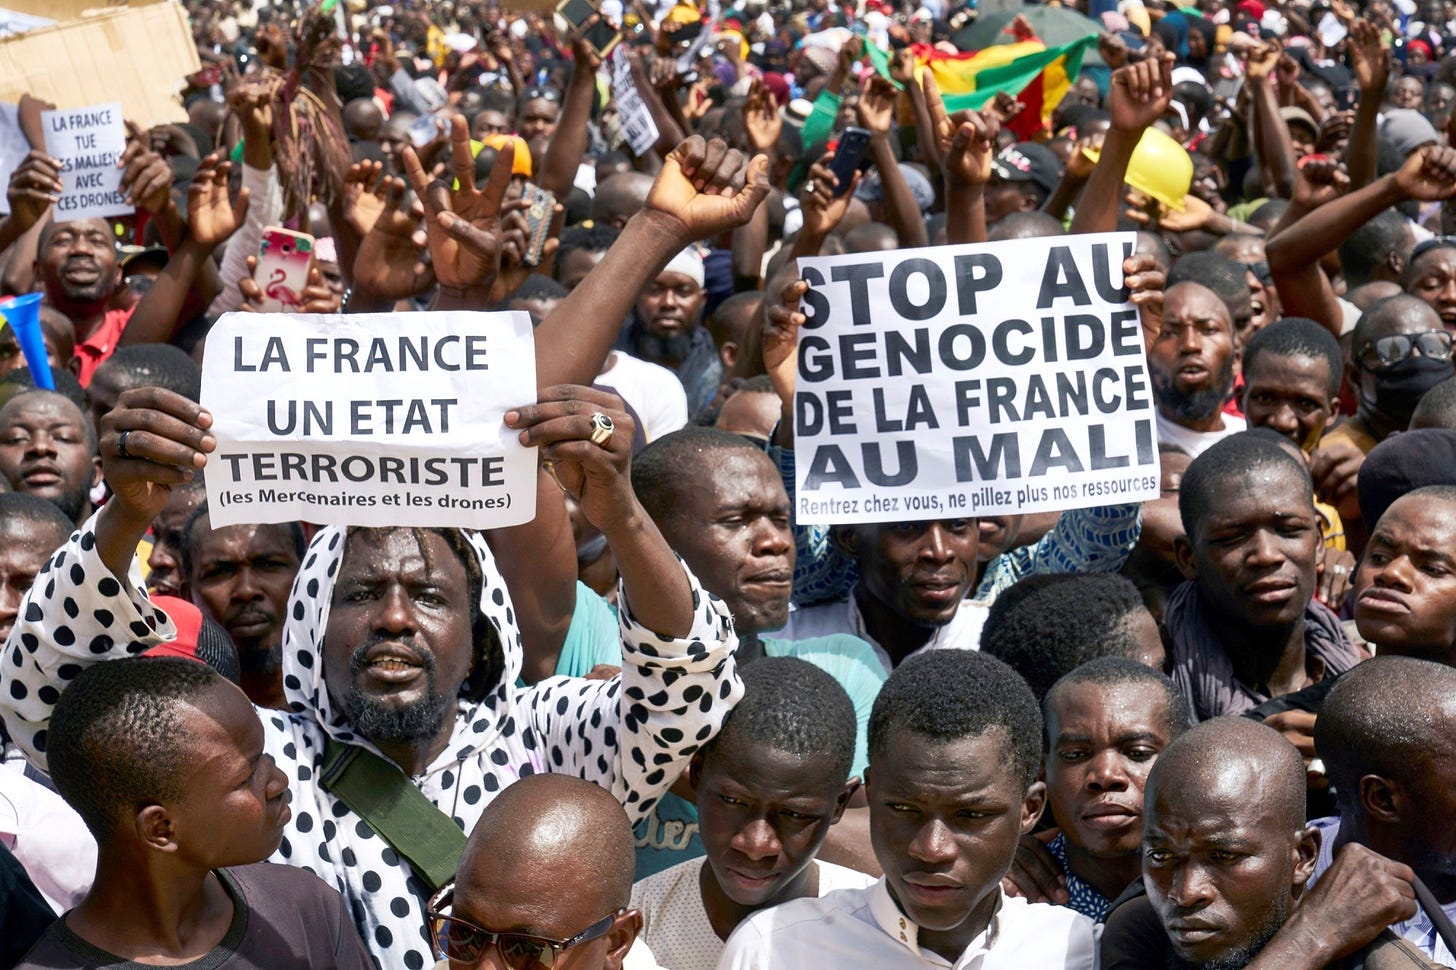 Anti-colonial fighters resist French war in Mali – Workers World